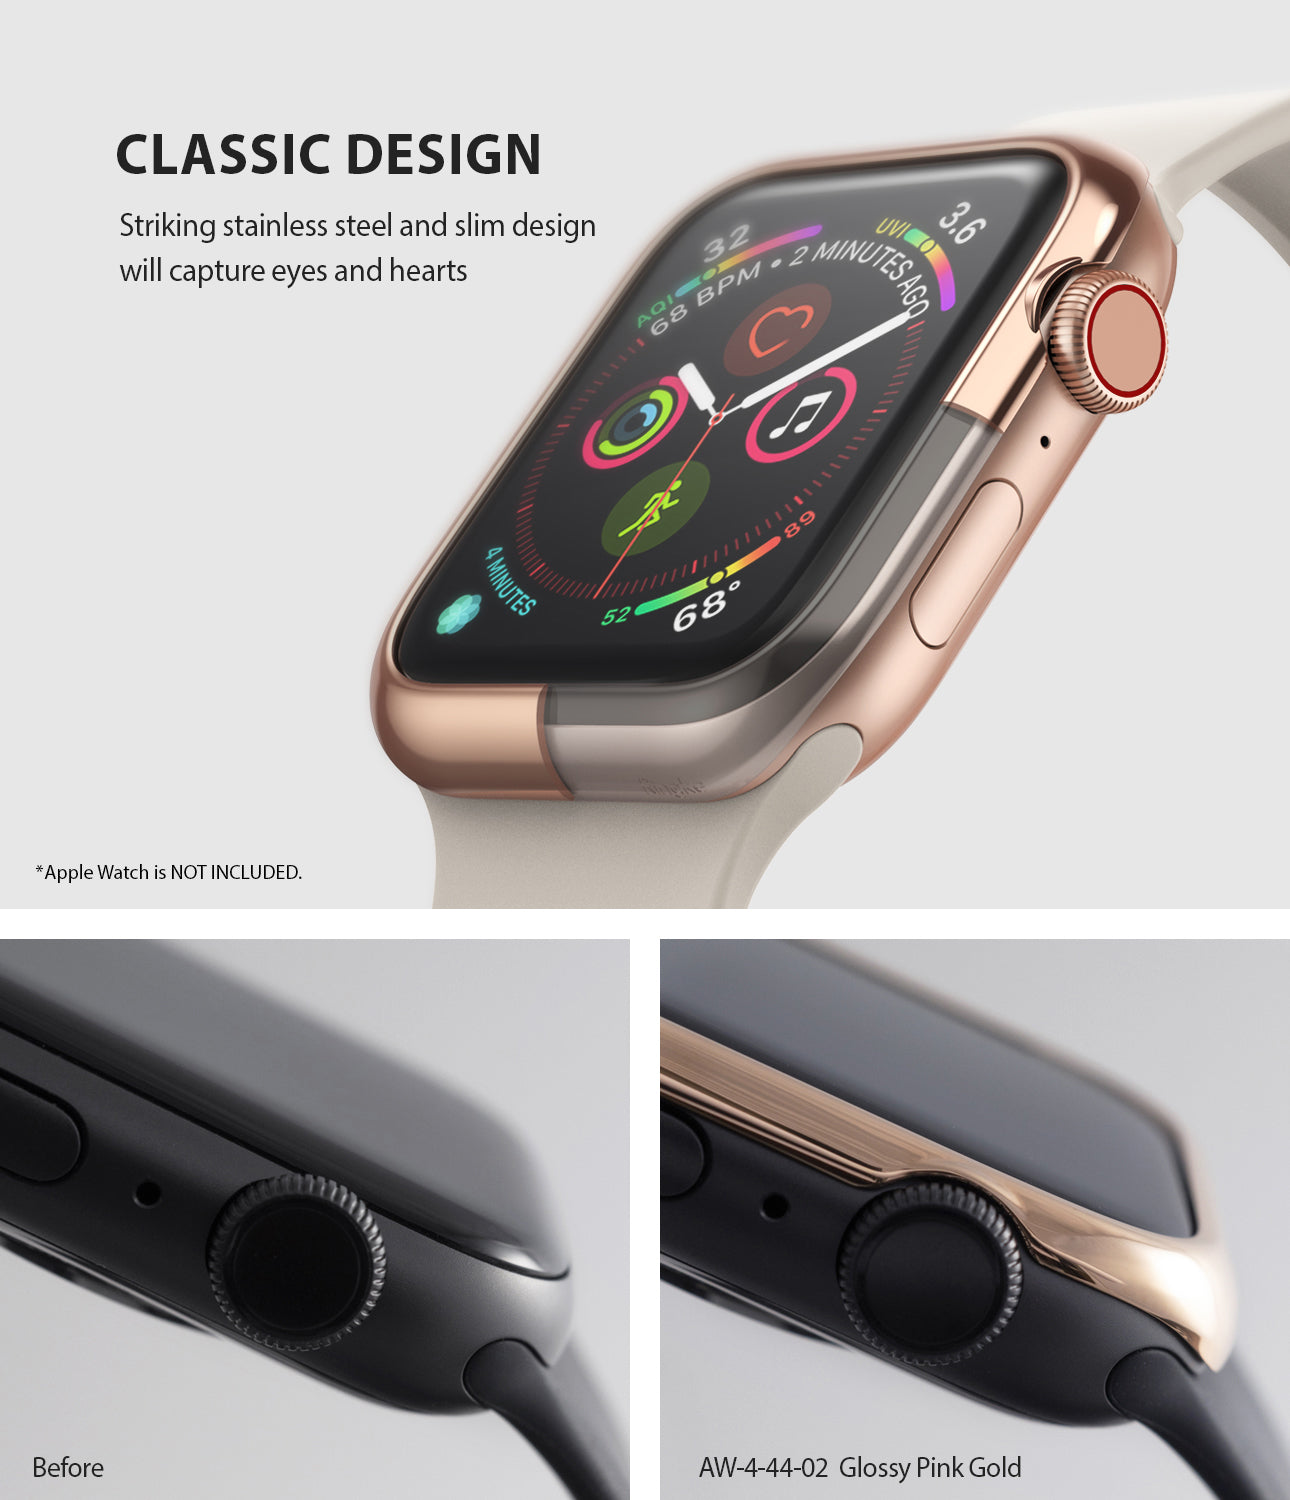 apple watch 4 44mm case ringke bezel styling stainless steel frame cover 44-02 classic design